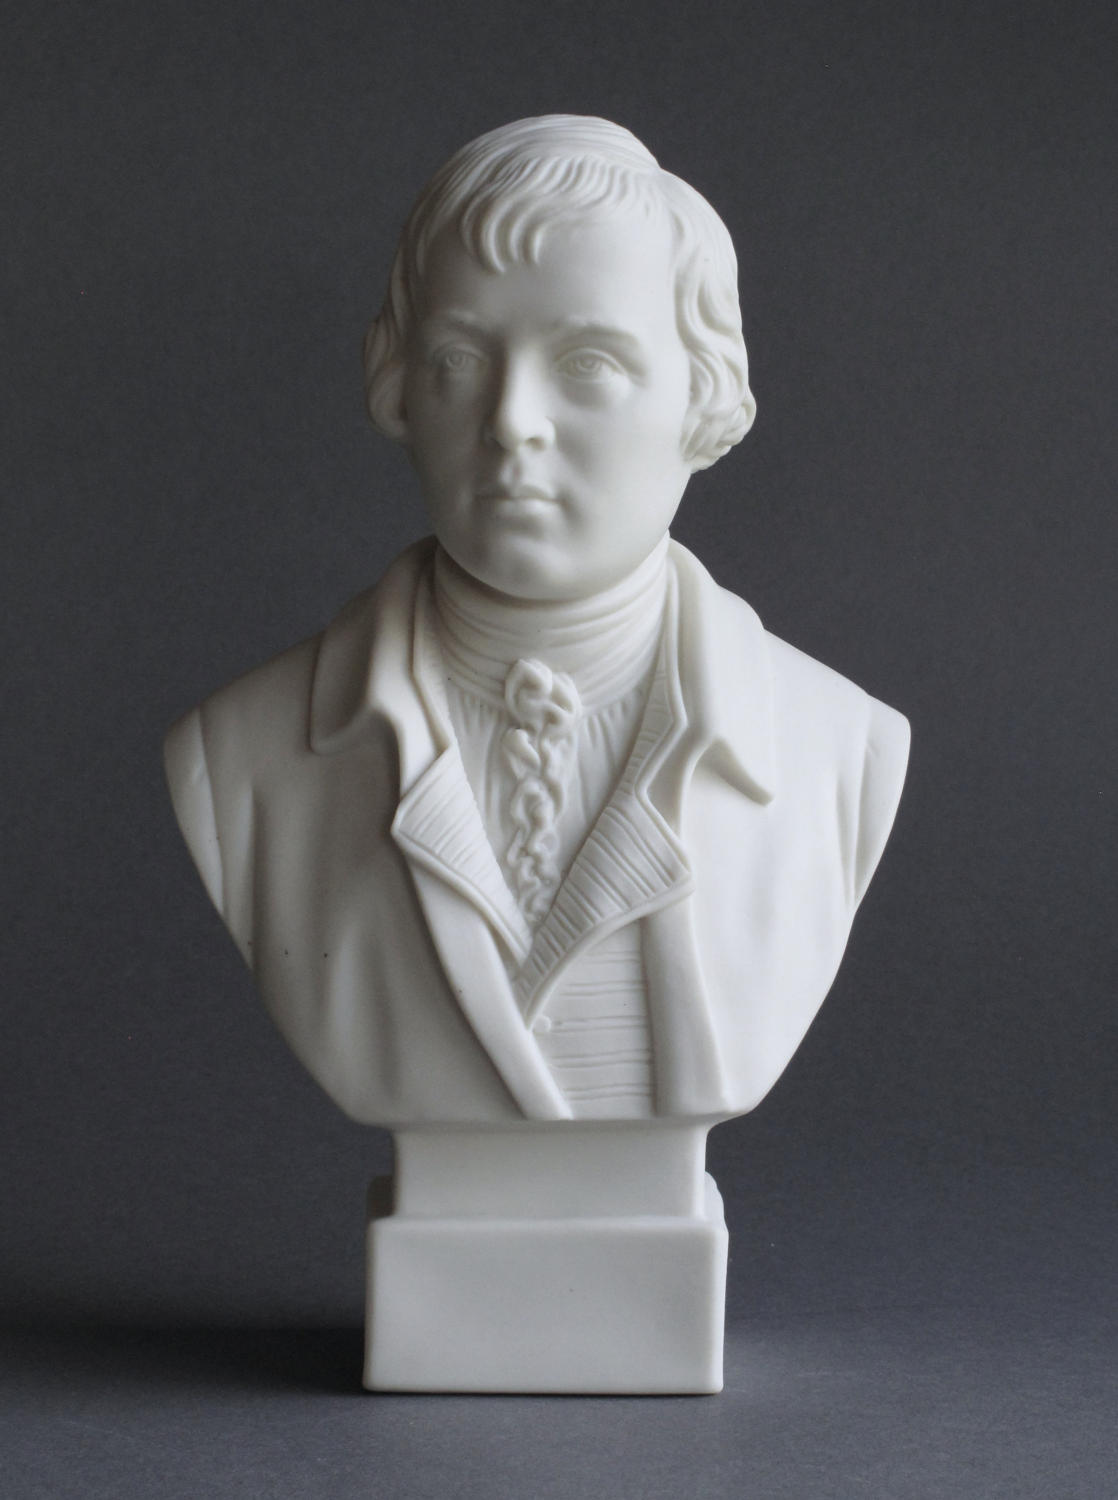 A small Parian bust of Robert Burns by Robinson and Leadbeater